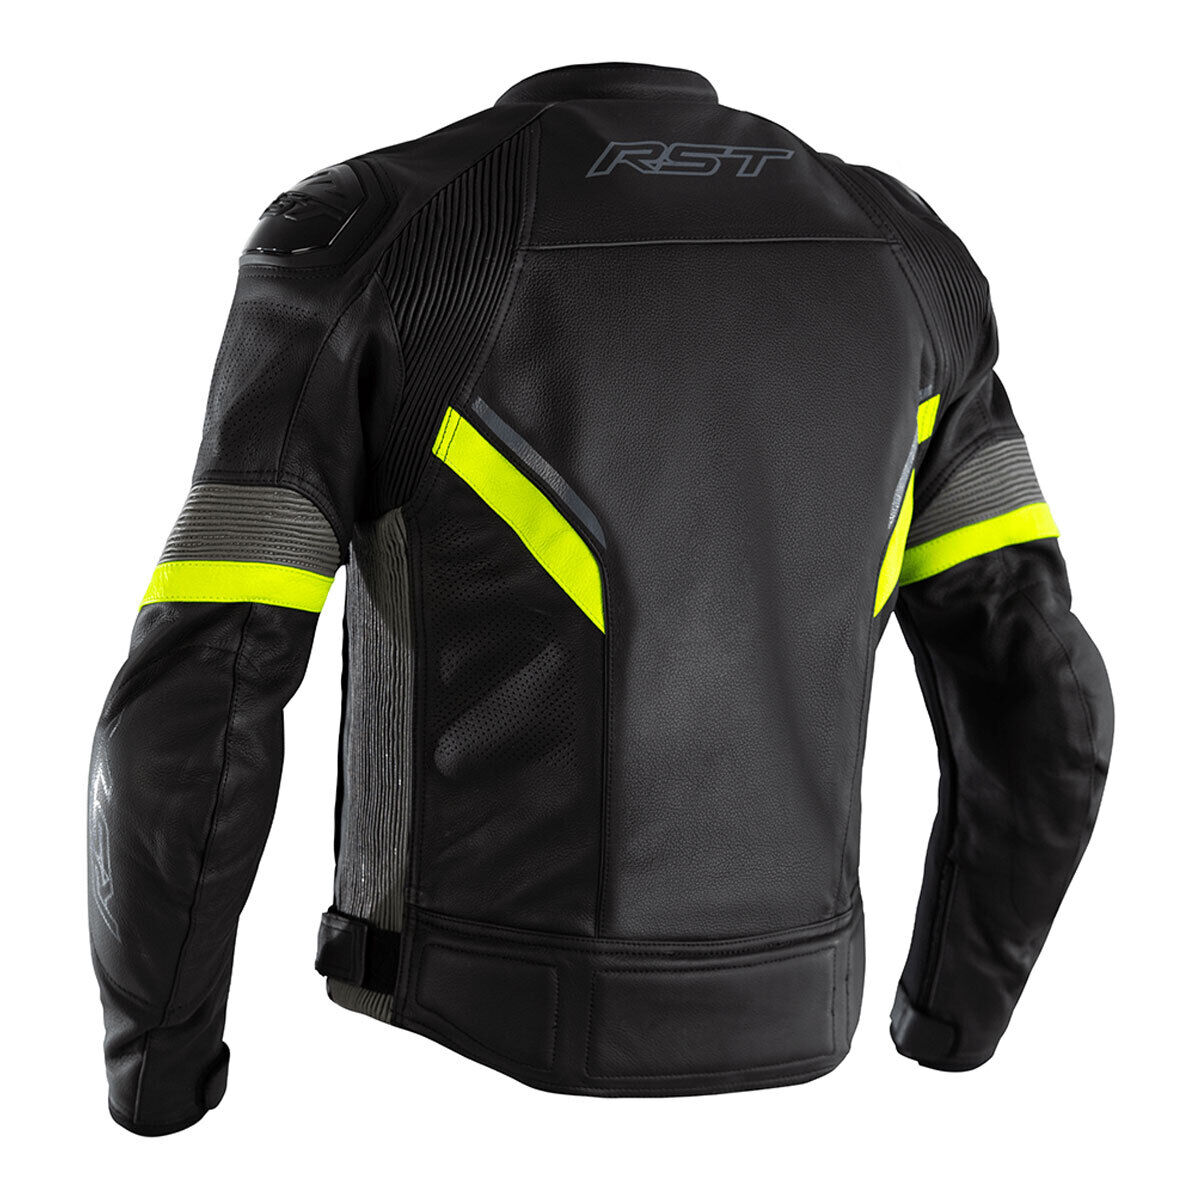 SABRE CE MENS LEATHER JACKET - FLO YELLOW